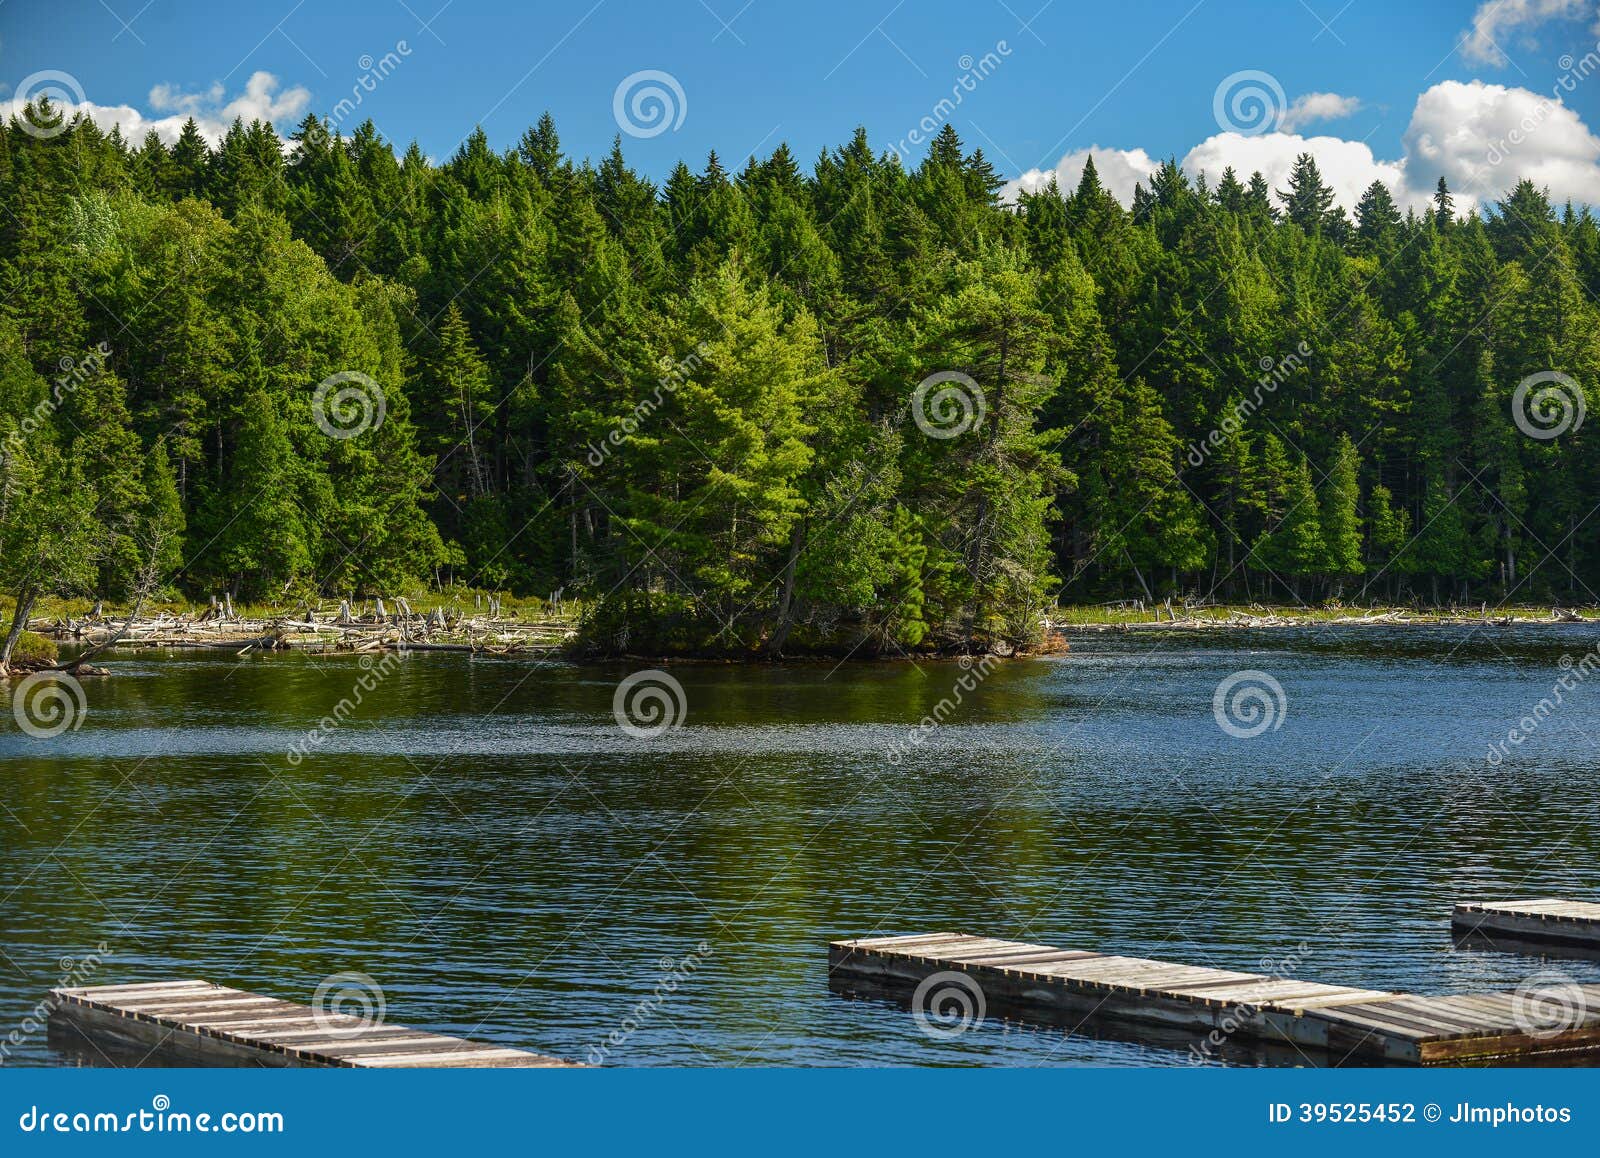 Perfect Summer Day on a Calm Lake Stock Photo - Image of clear, largest ...